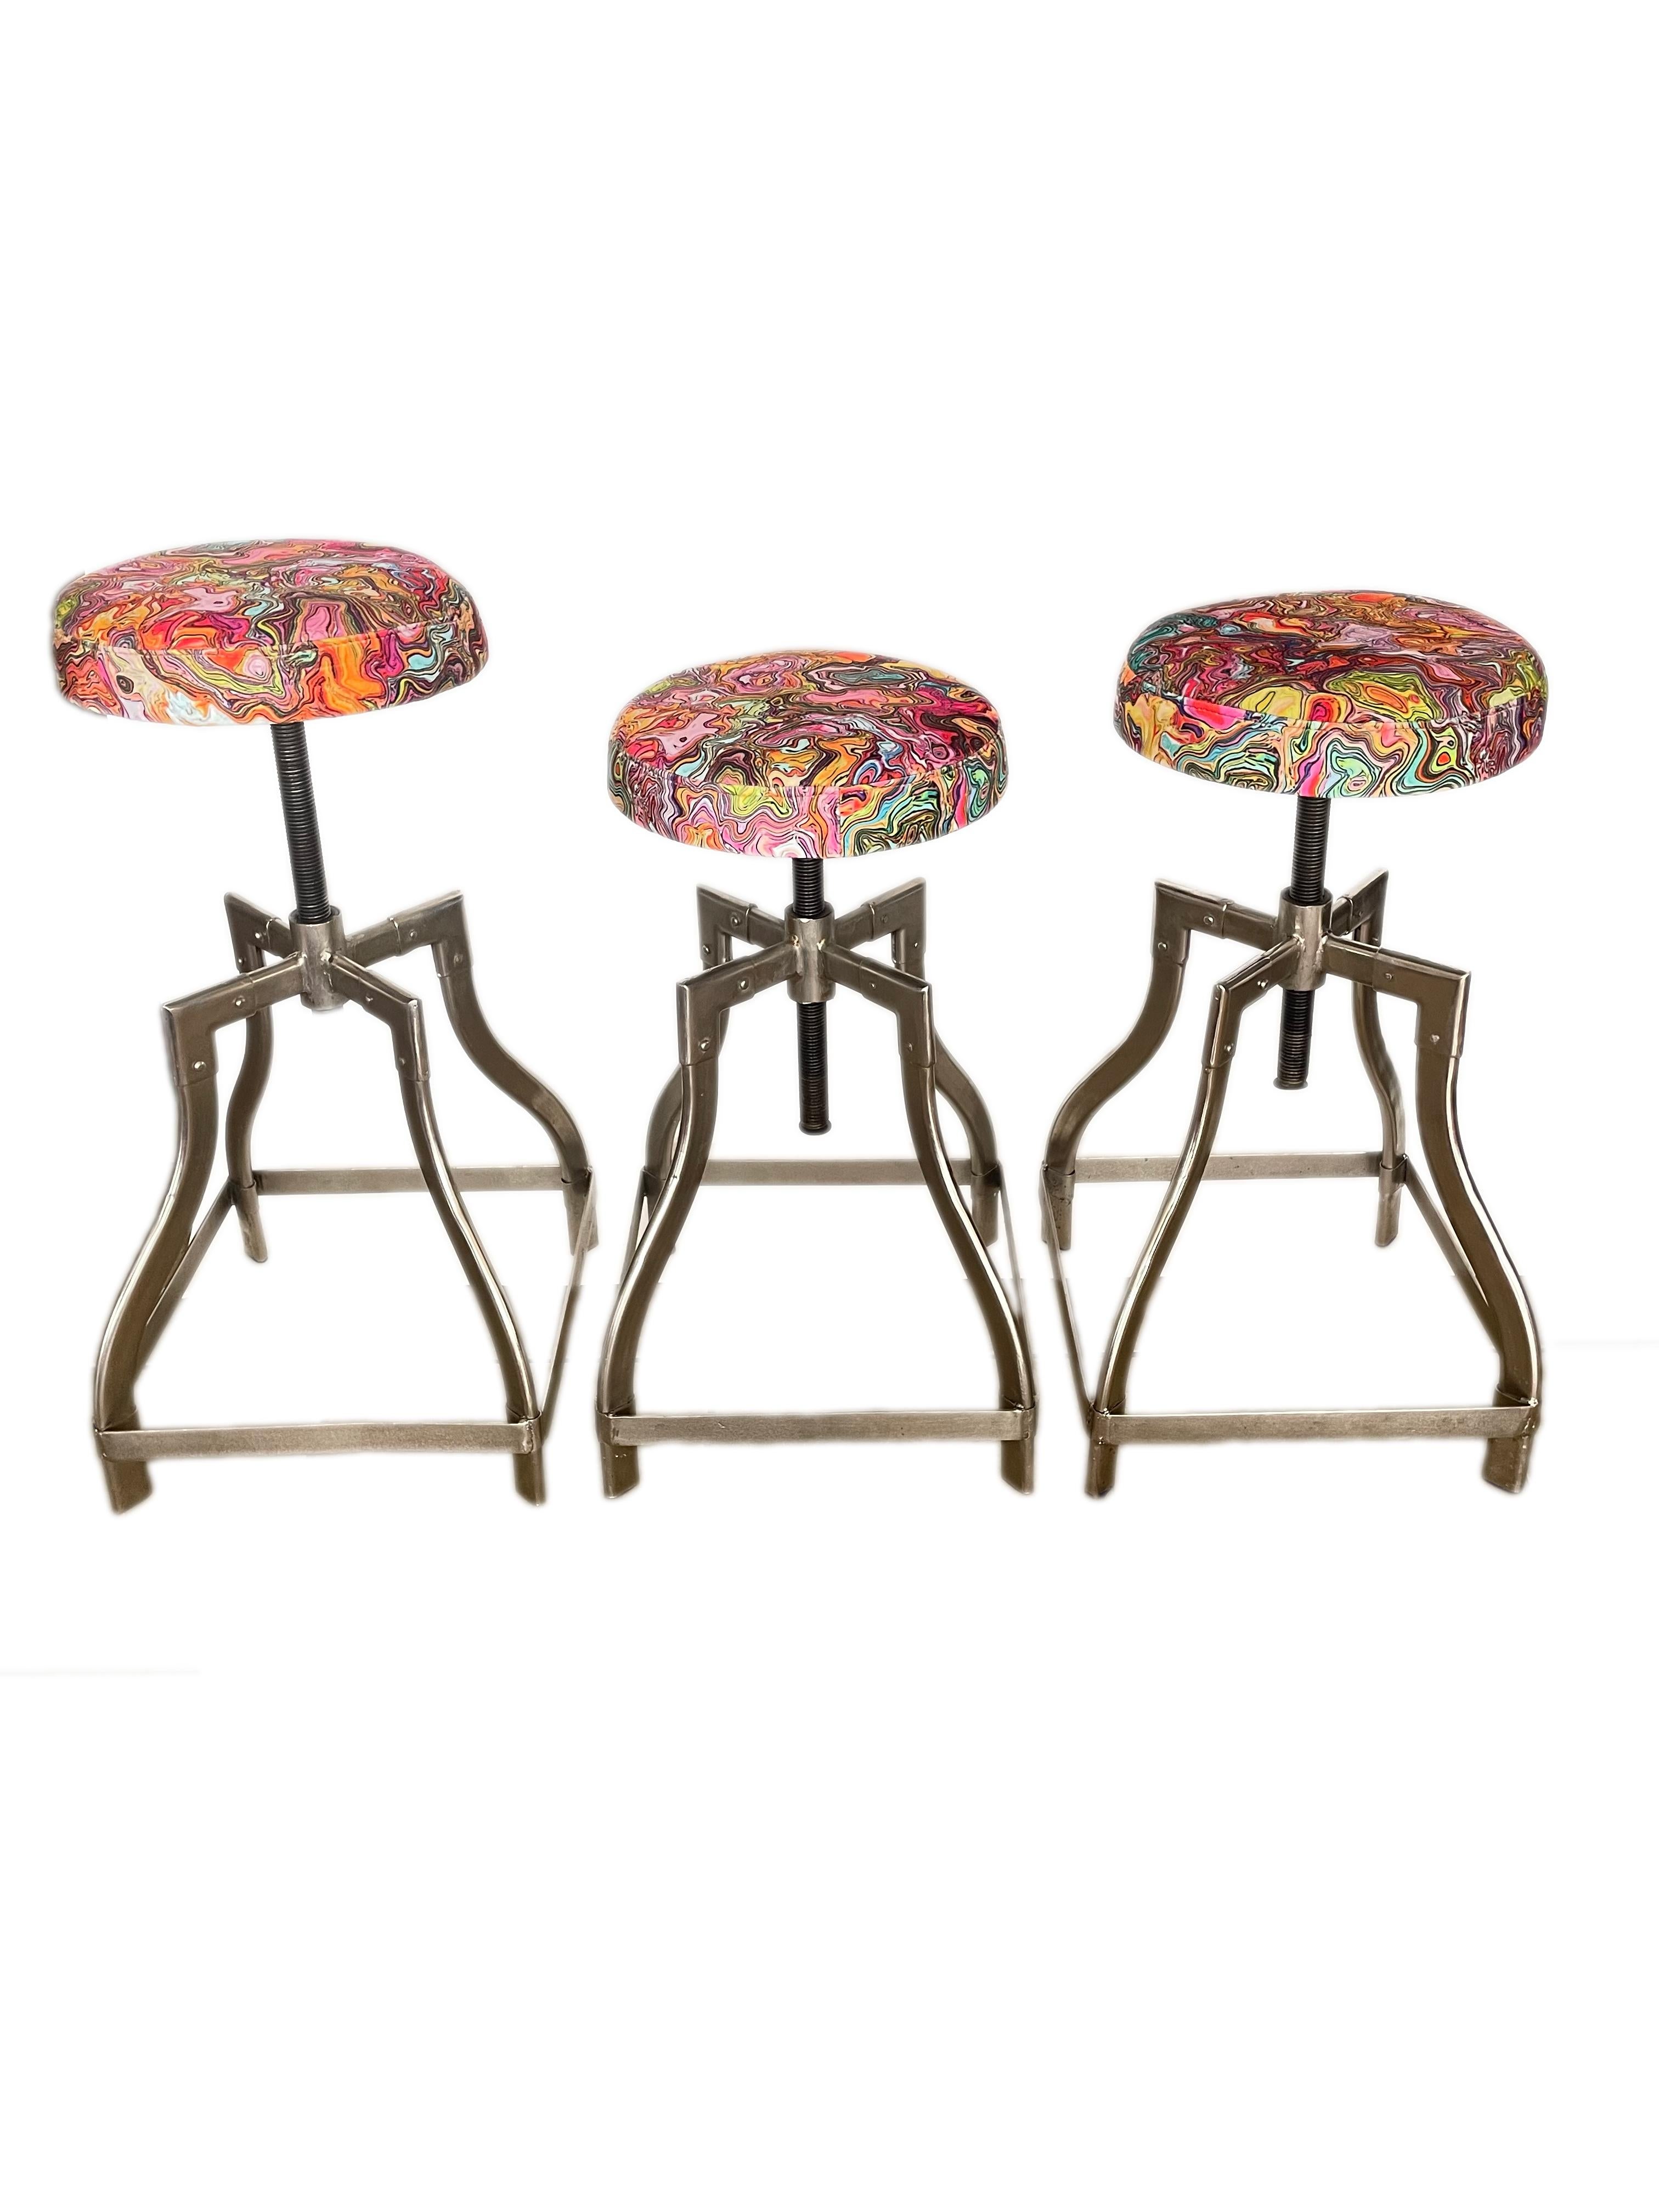 A set of three American mid-20th century steel and upholstered Industrial Swivel Stools upholstered in a bright and vibrant psychedelic upholstery with round seat and adjustable steel swivel base. The modernist, utilitarian design allows the chairs